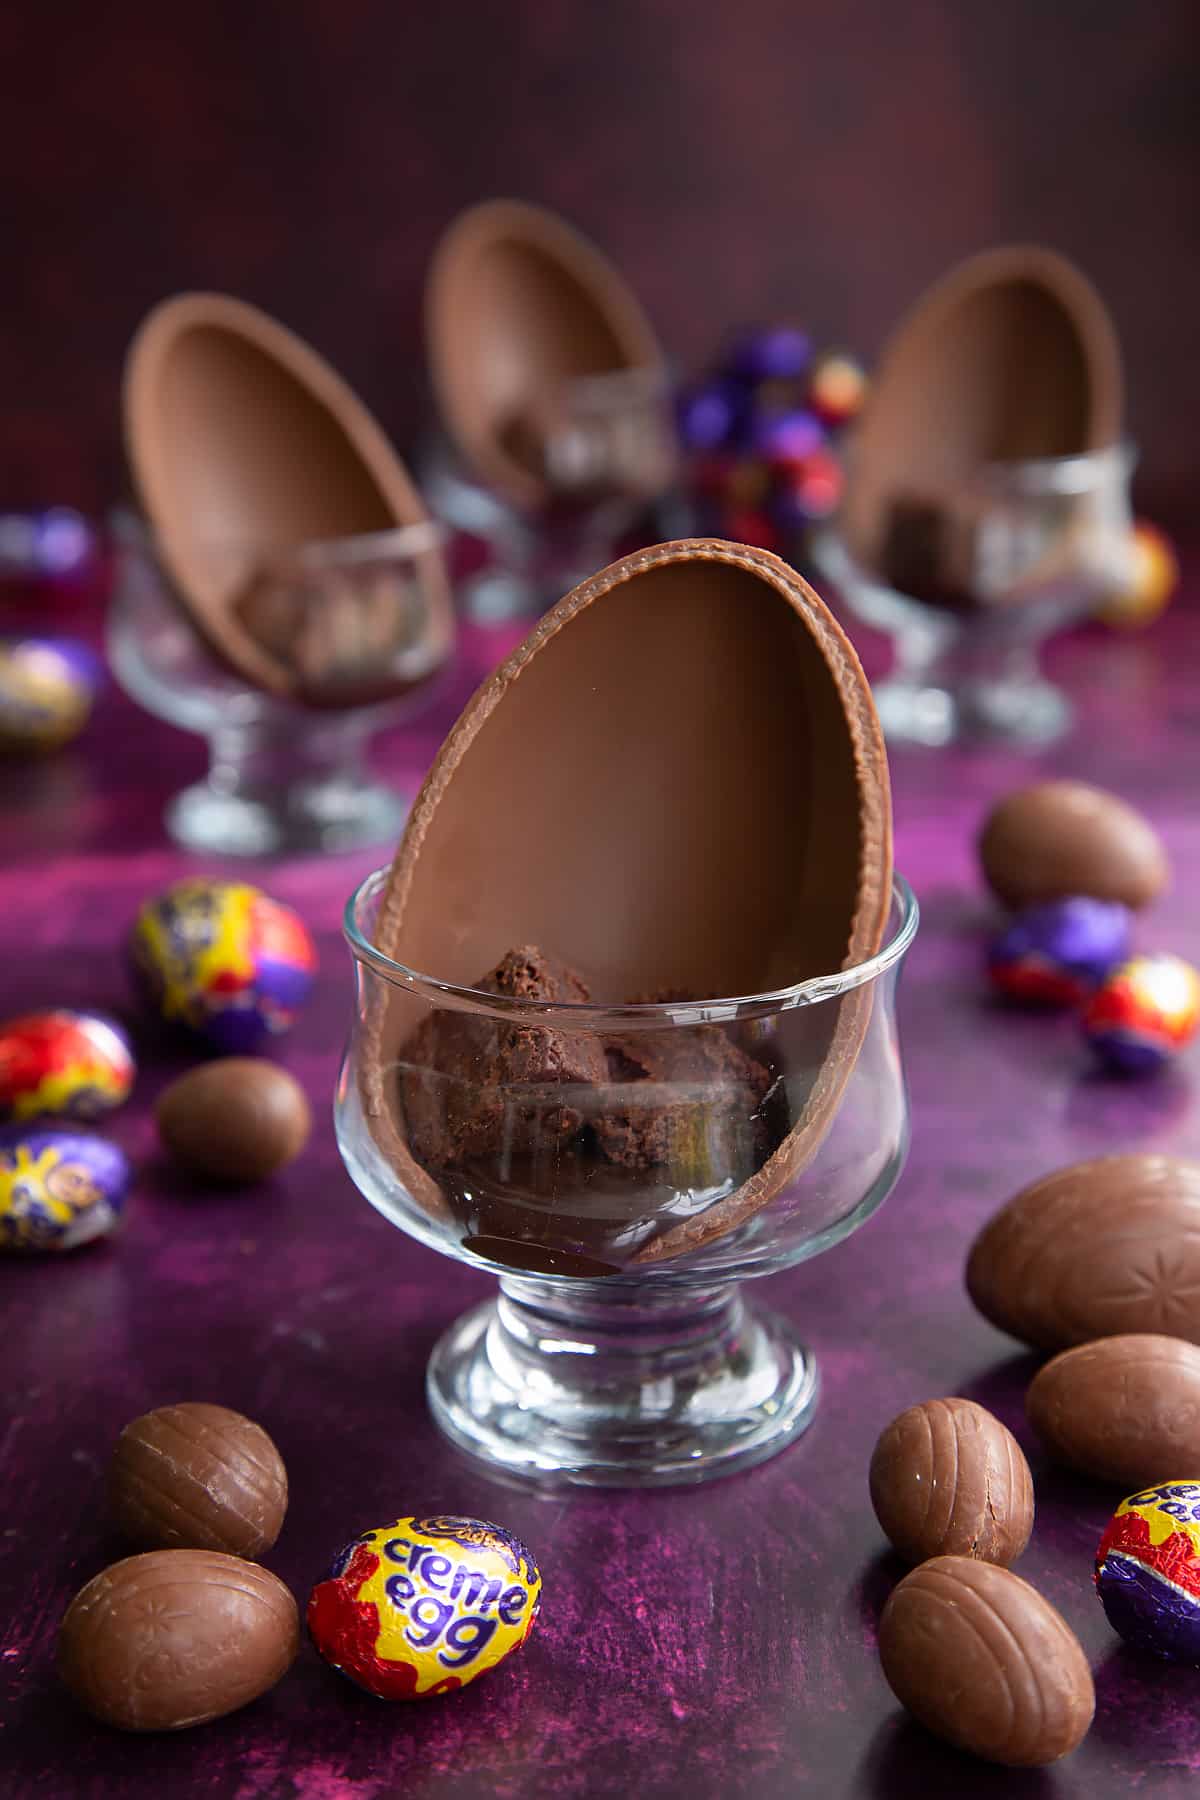 Half an Easter egg in a decorative bowl with melted chocolate and three brownie bites.